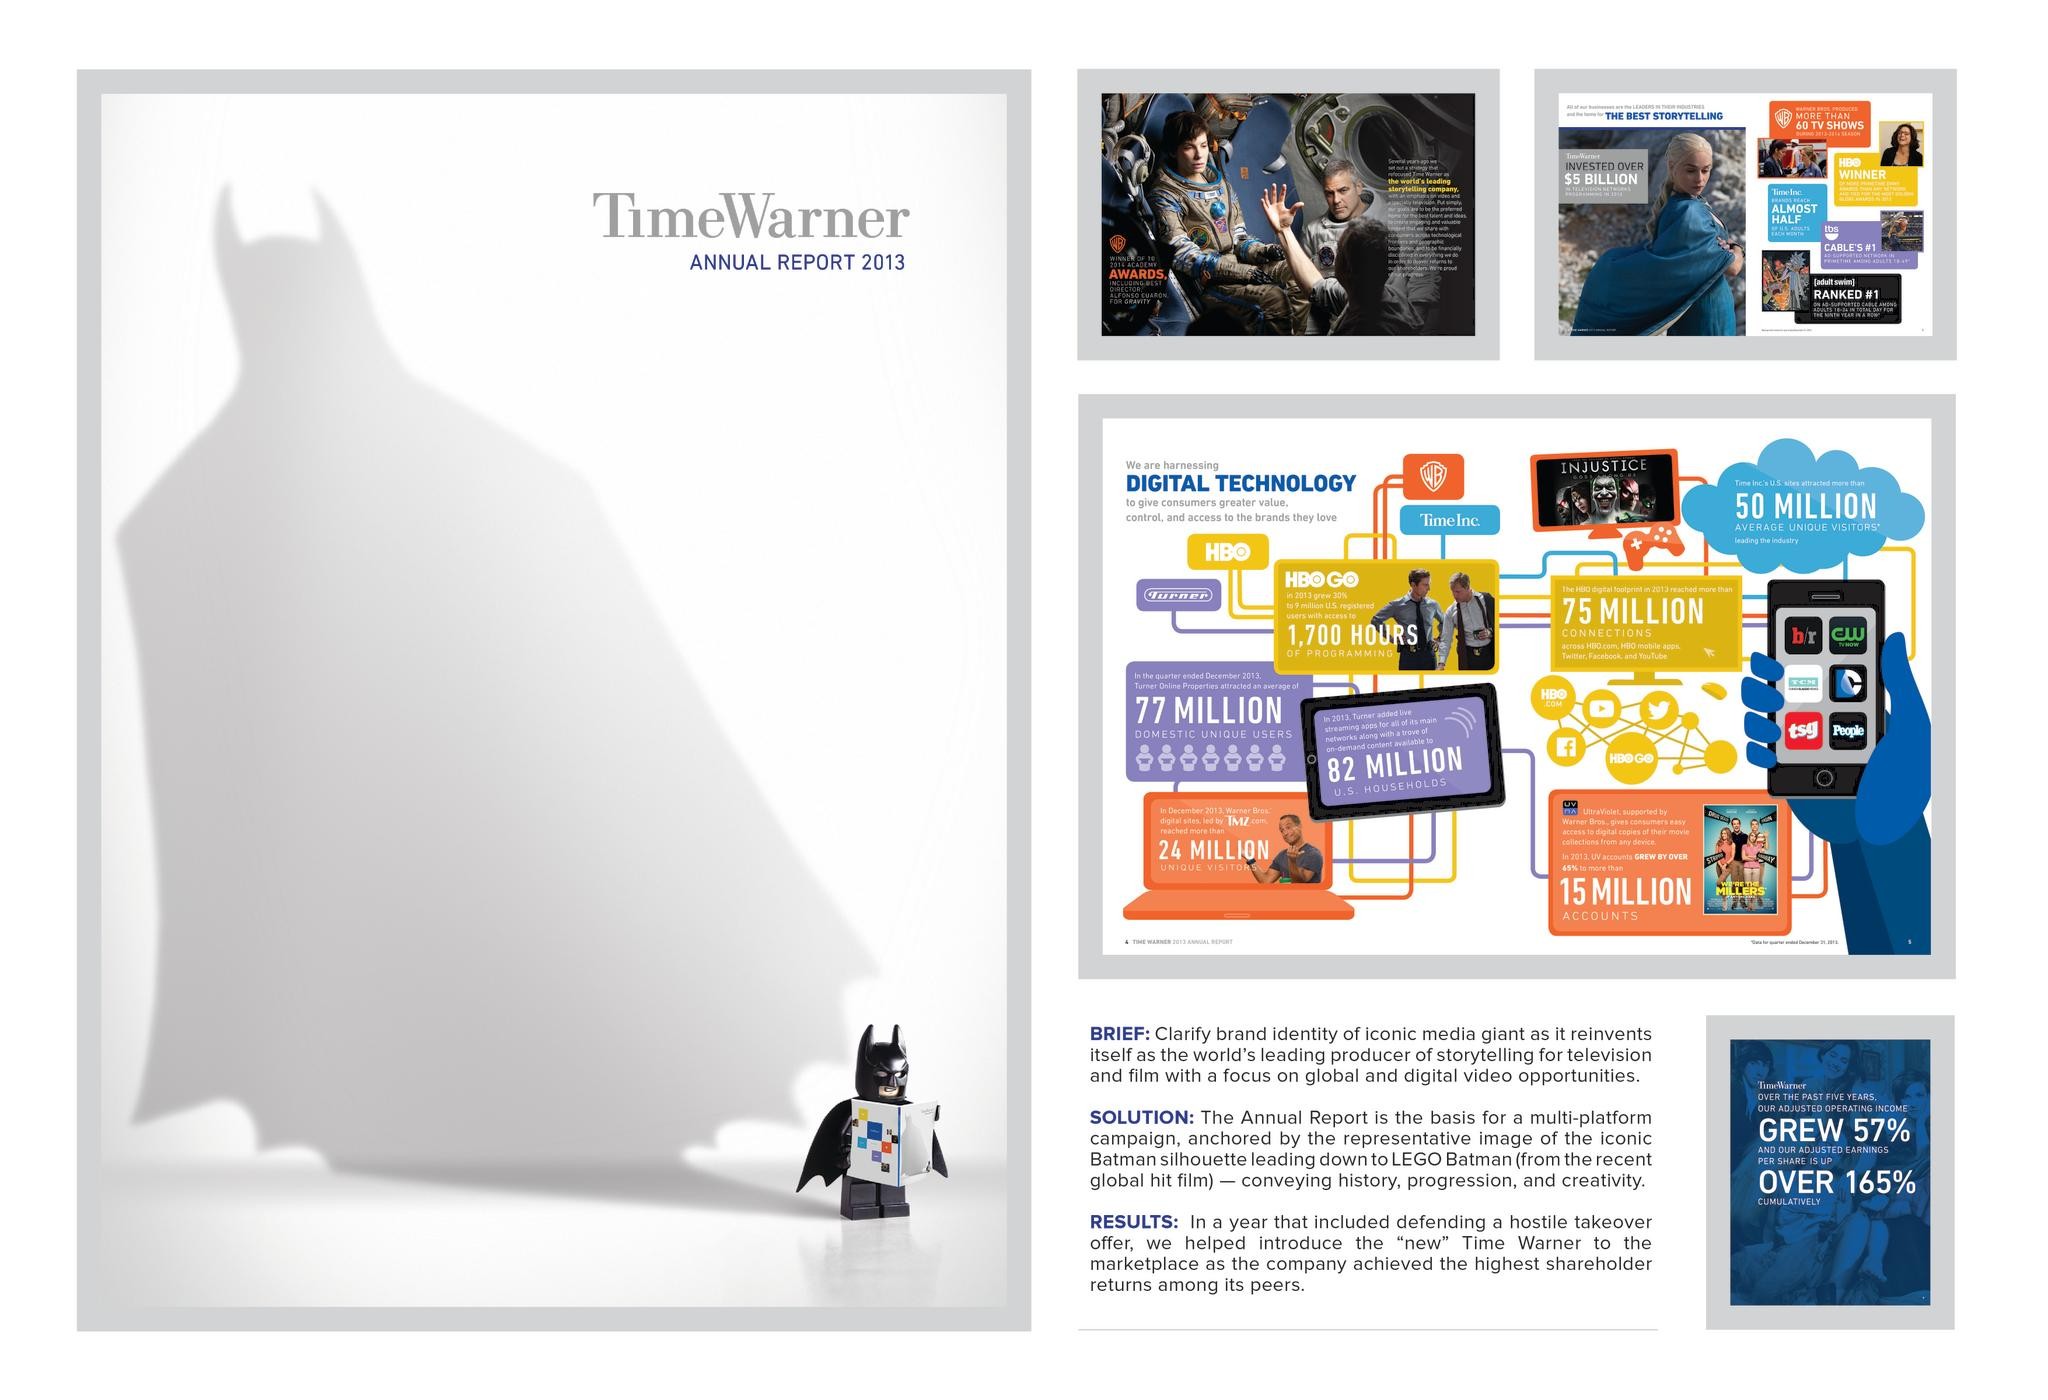 TIME WARNER ANNUAL REPORT 2013